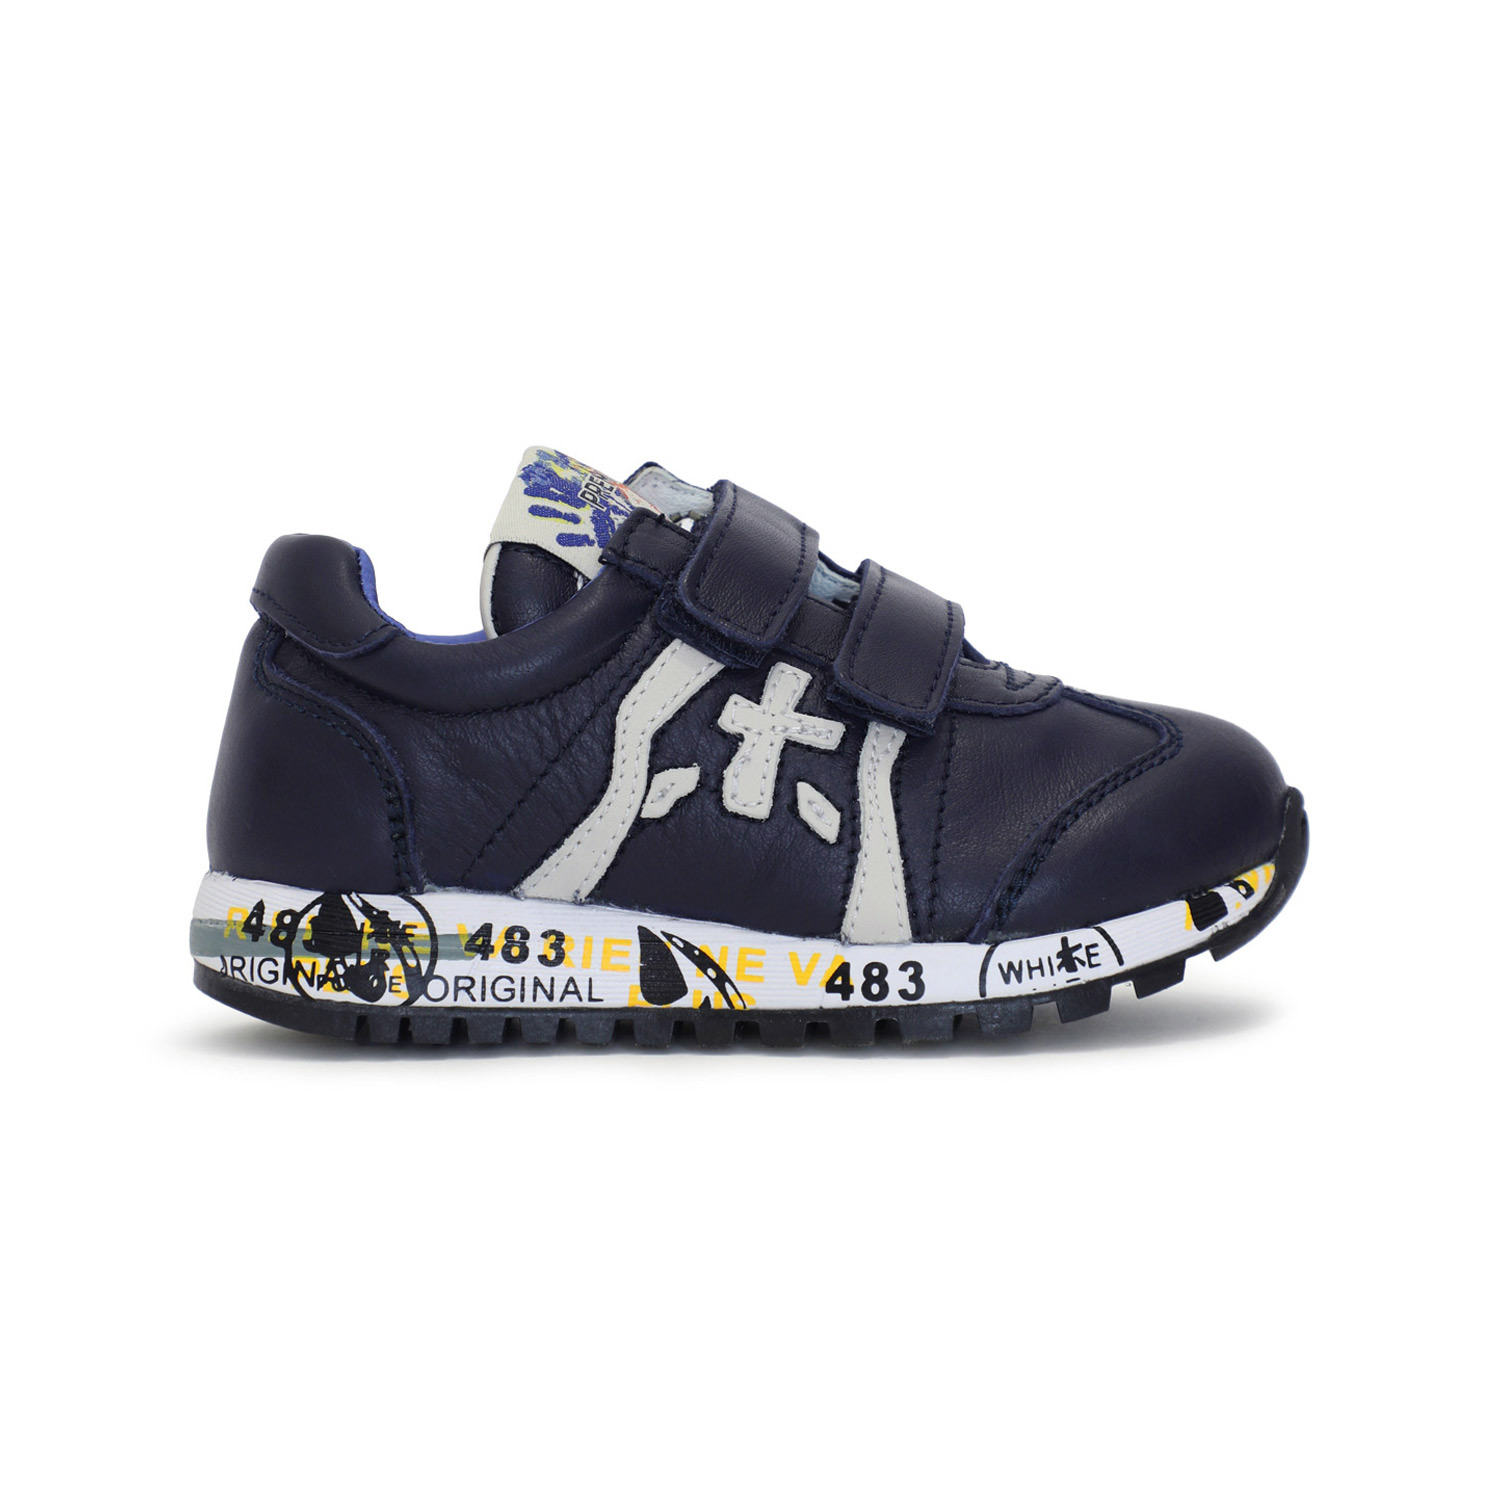 Premiata will be Lucy navy blue velcro leather sneaker Sydney AU